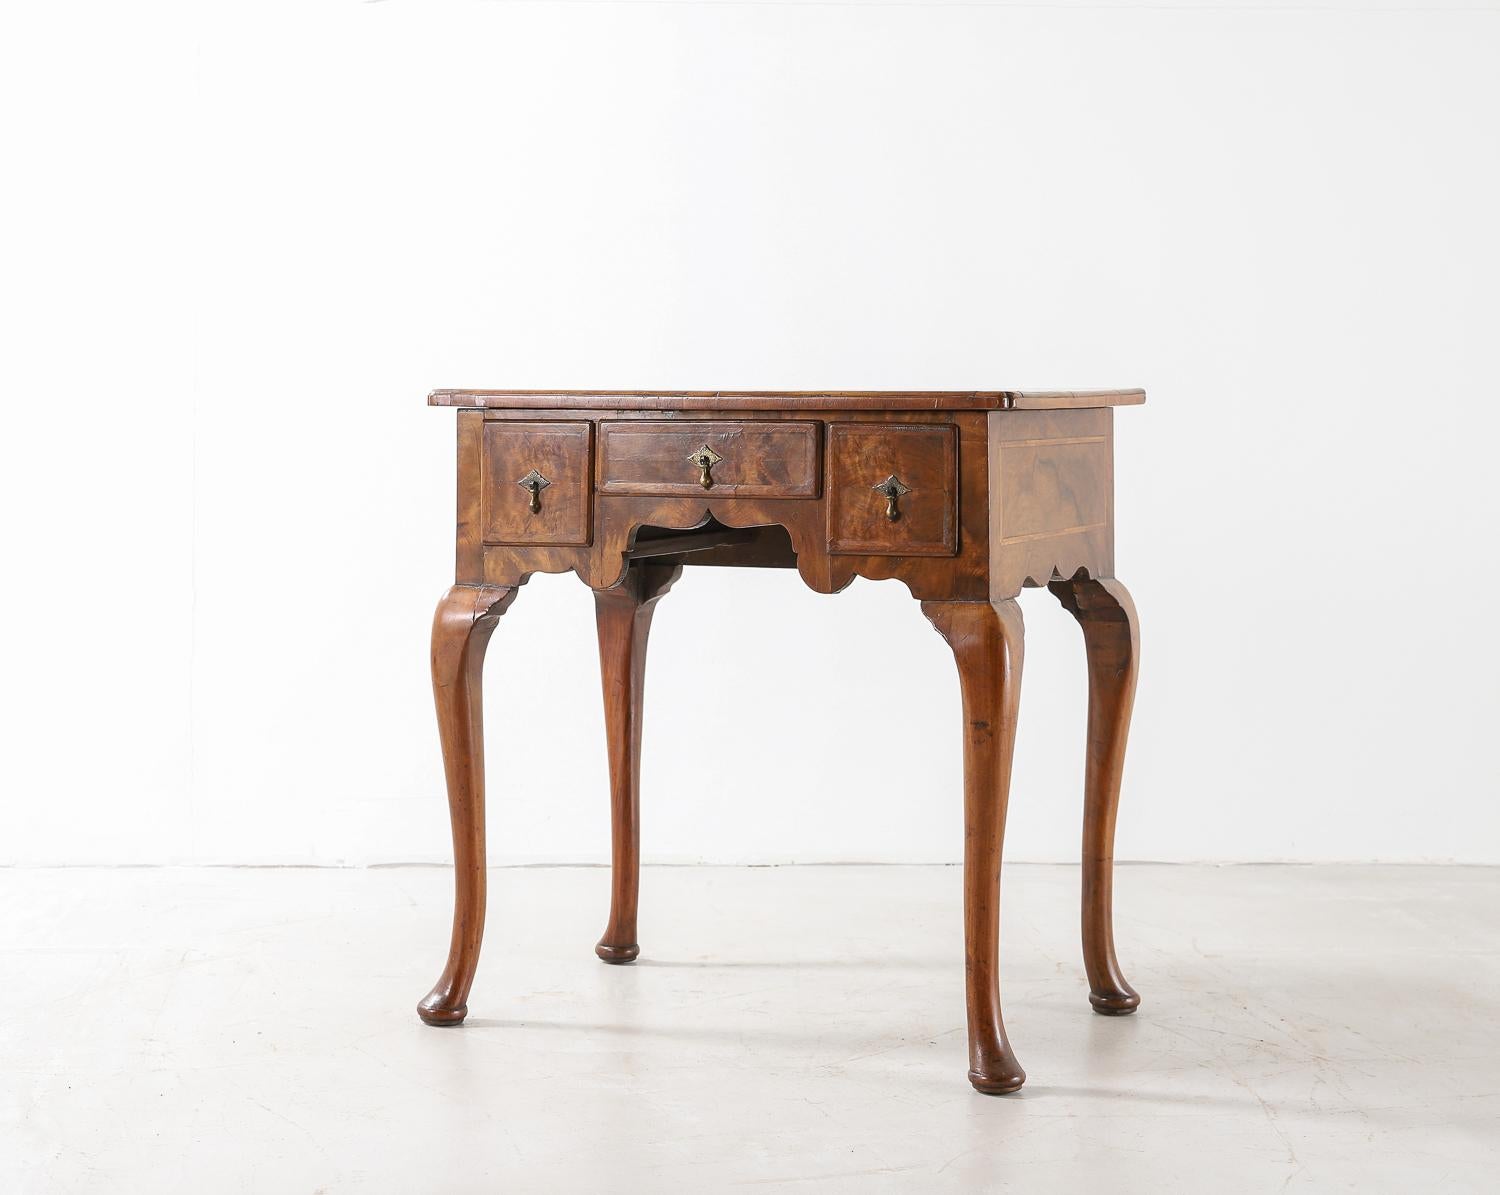 18th century walnut lowboy with three drawers with small brass handles and cabriole legs.